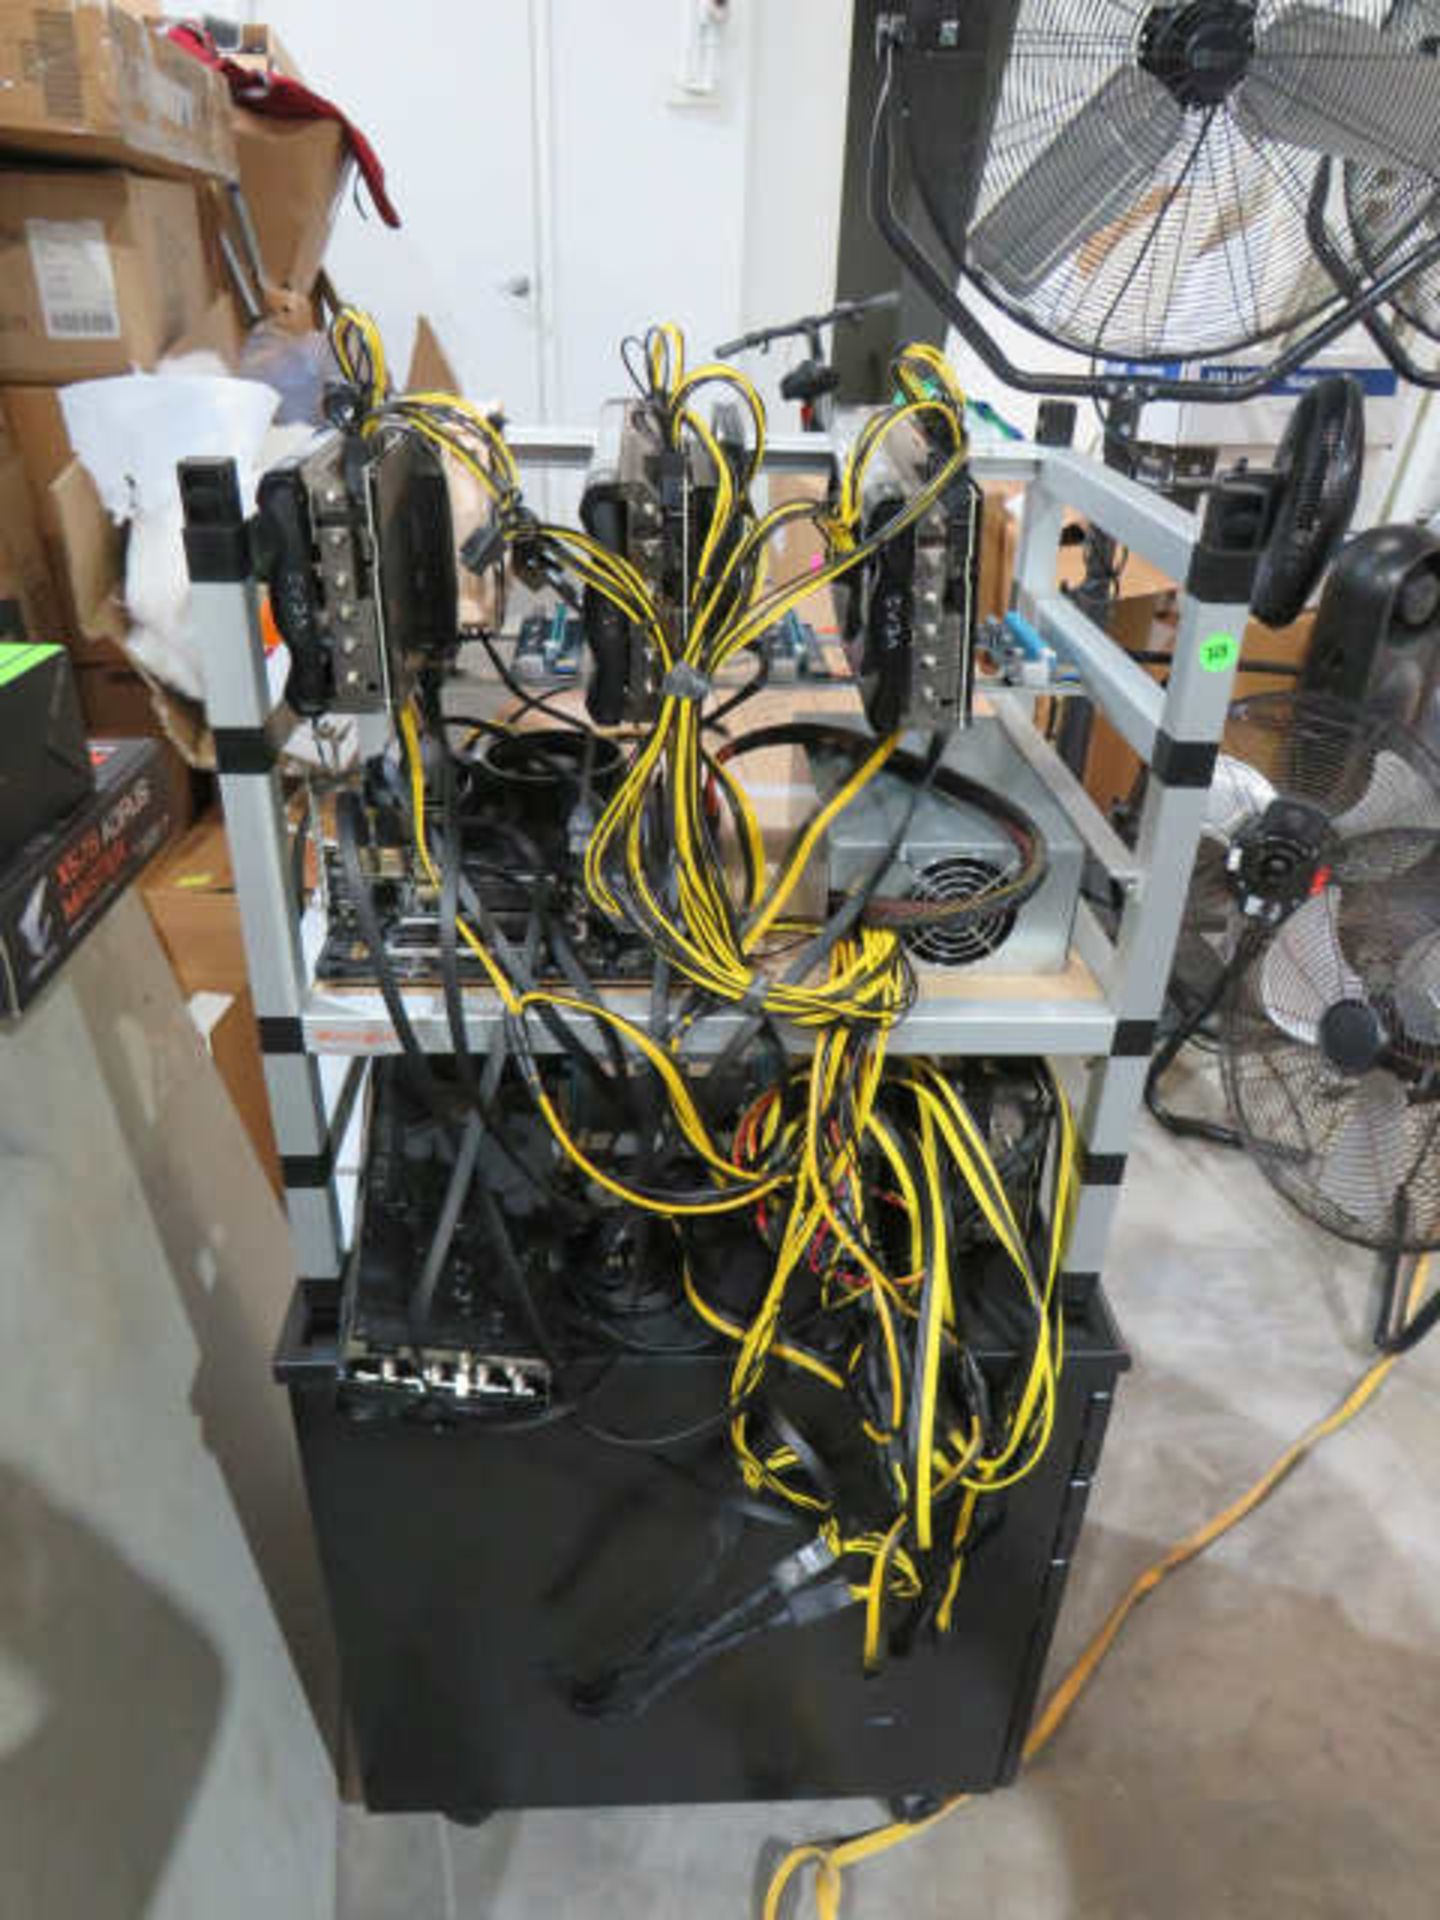 crypto mining rig with 6 Geeforce rtx 3090 graphics cards comes - Image 5 of 10